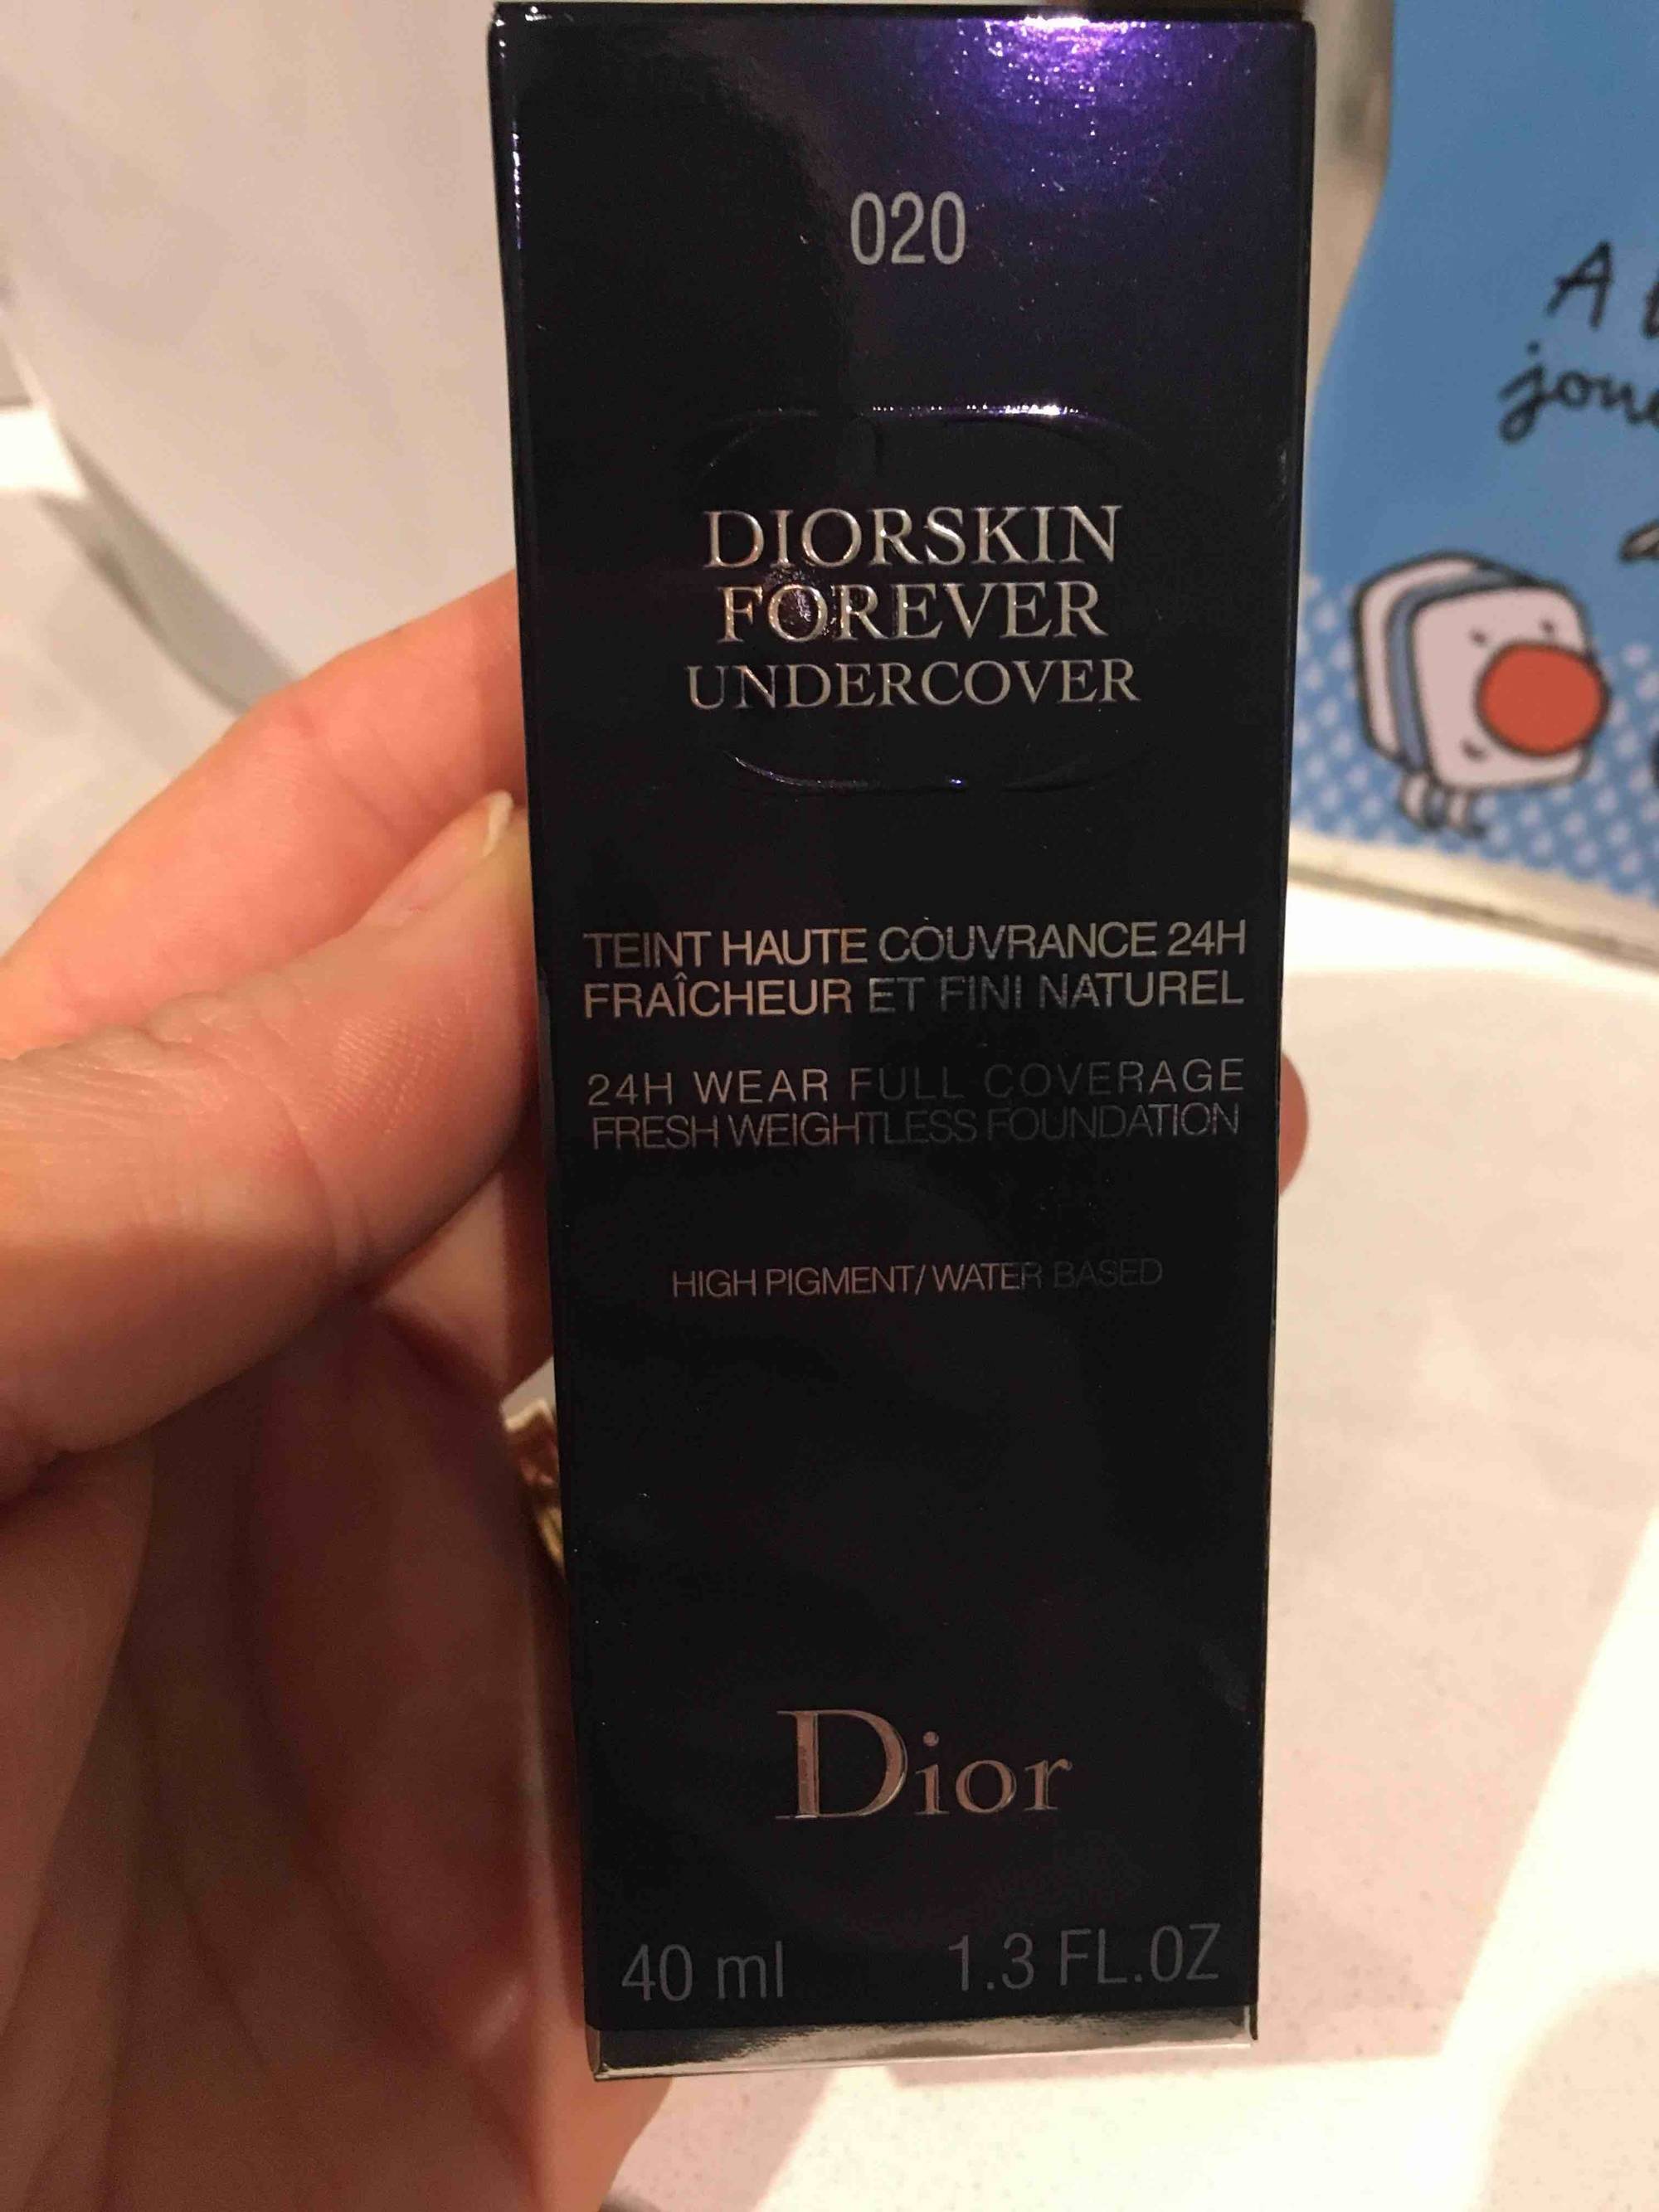 DIOR - Diorskin forever undercover - 020 Teint haute couvrance 24h